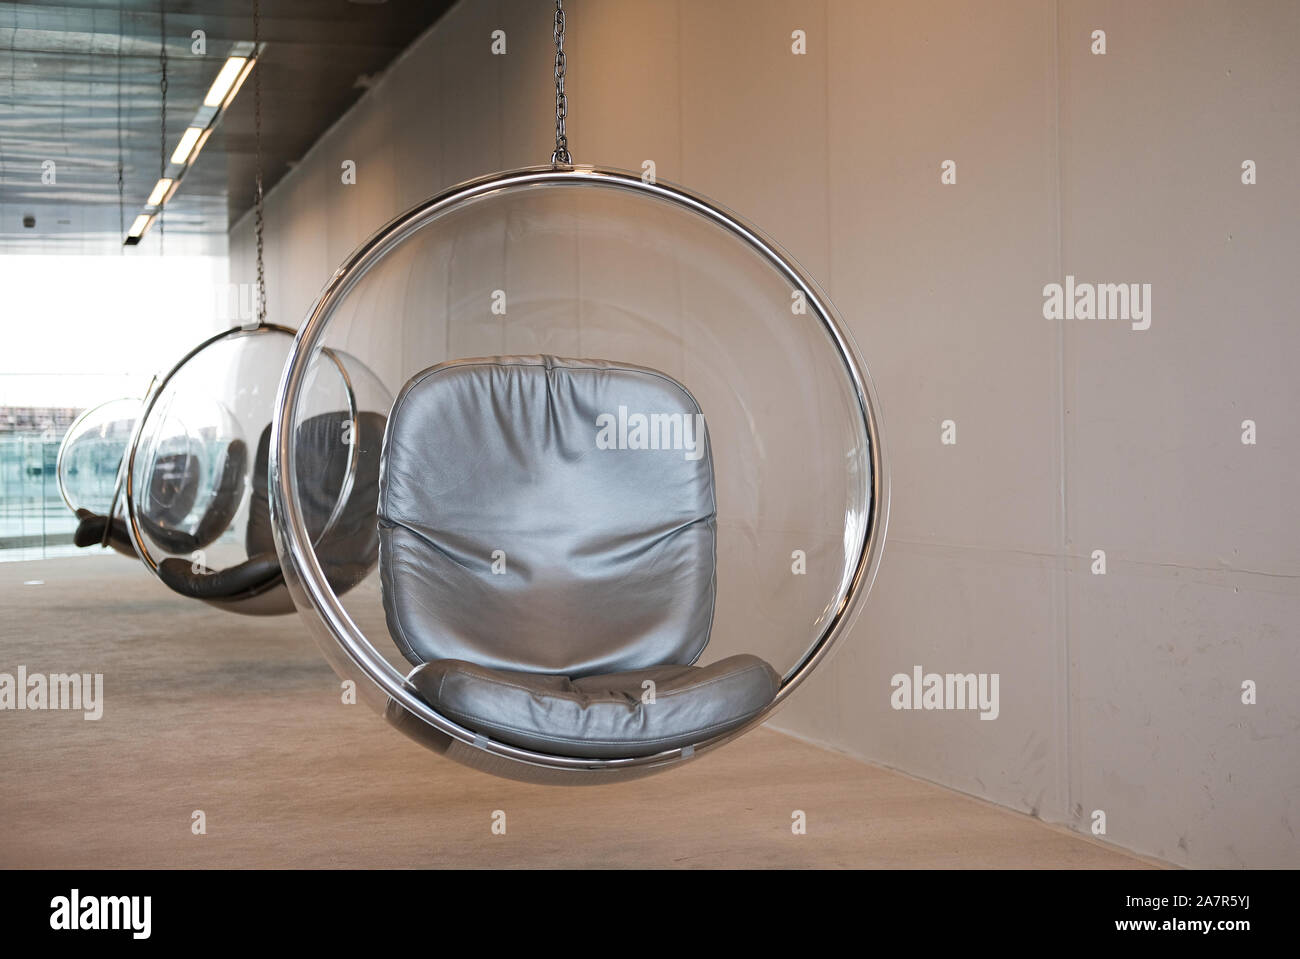 The suspended Eero Aarnio bubble chairs at the National Library in Education in Qatar provide a quiet reading space. Stock Photo